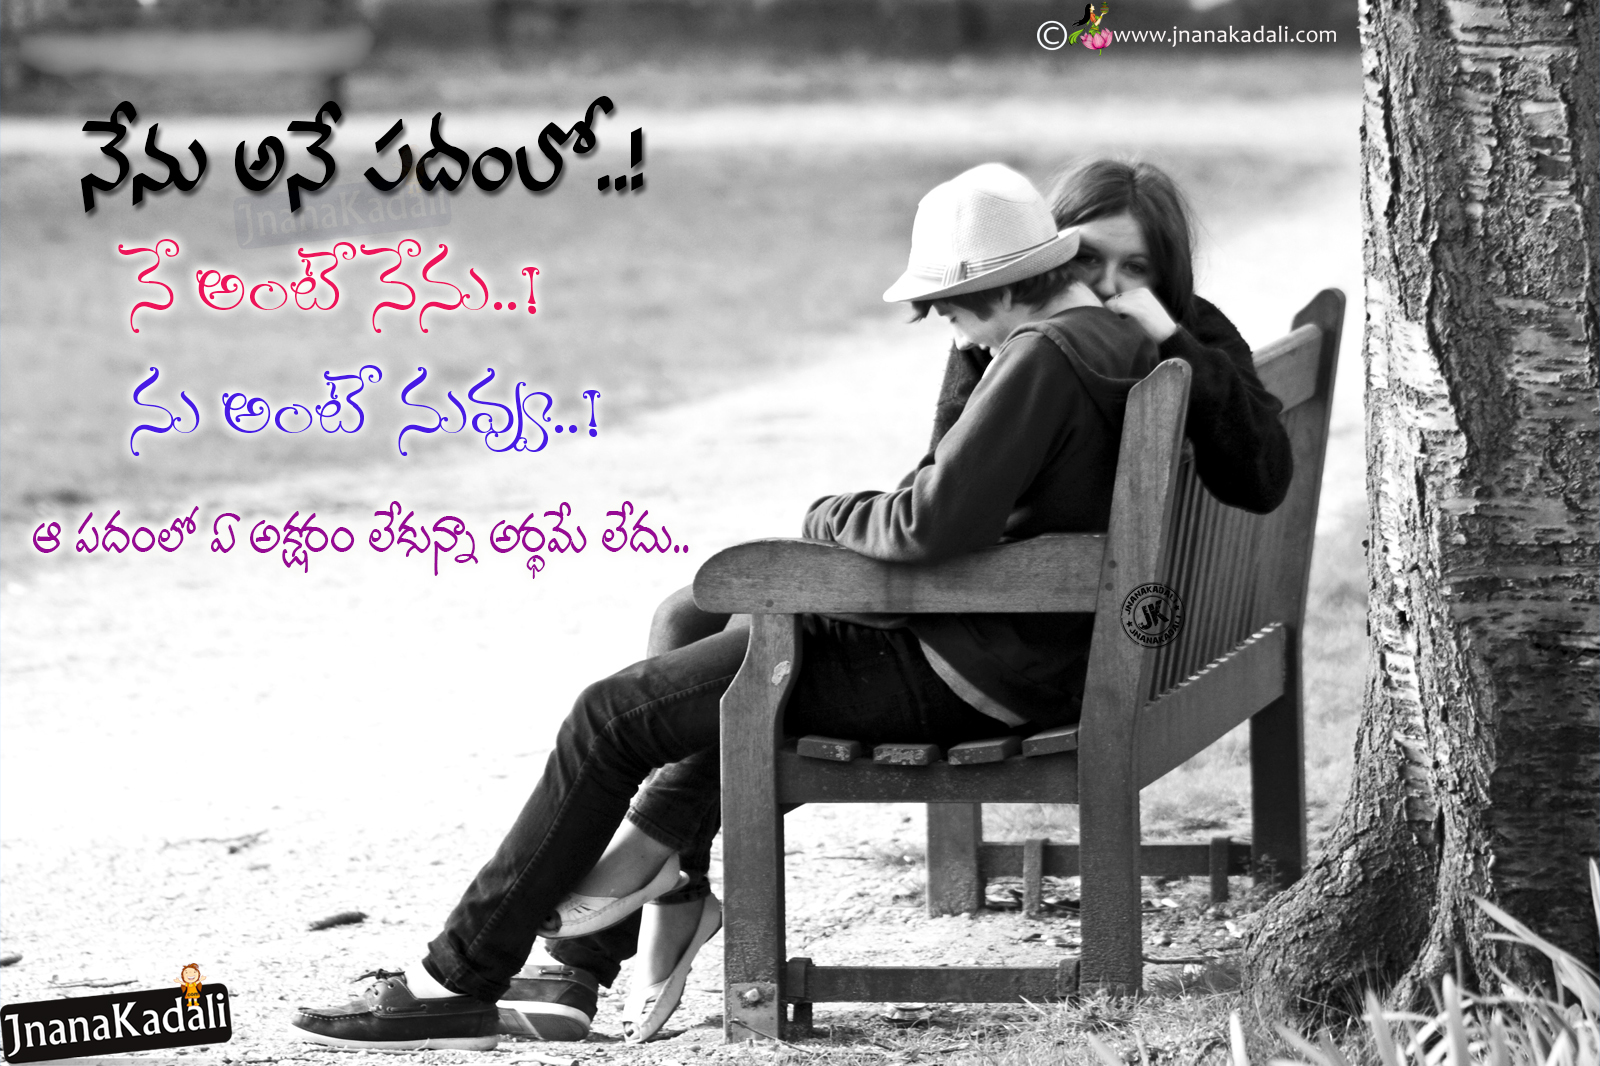 True Meaning of Love in Telugu-Telugu Love Poetry Images Pictures ...